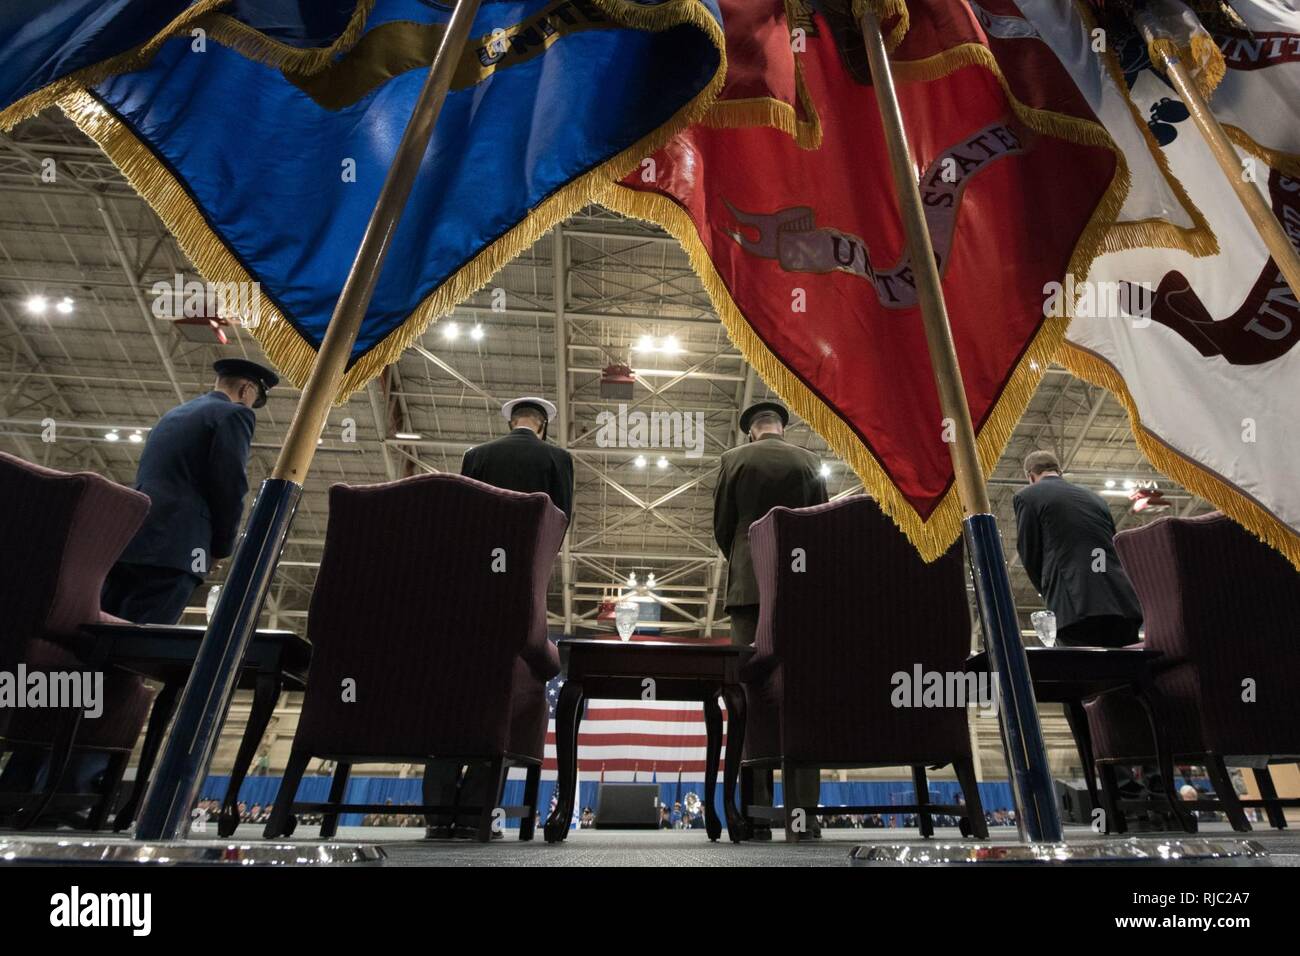 Defense Secretary Ash Carter, Marine Gen. Joseph F. Dunford Jr., chairman of the Joint Chiefs of Staff, Air Force Gen. John E. Hyten, and Navy Adm. Cecil D. Haney participate in the Strategic Command change of command ceremony at Offutt Air Force Base, Omaha, Nebraska Nov. 3, 2016.  Air Force Gen. John E. Hyten assumes command from Navy Adm. Cecil D. Haney. Stock Photo